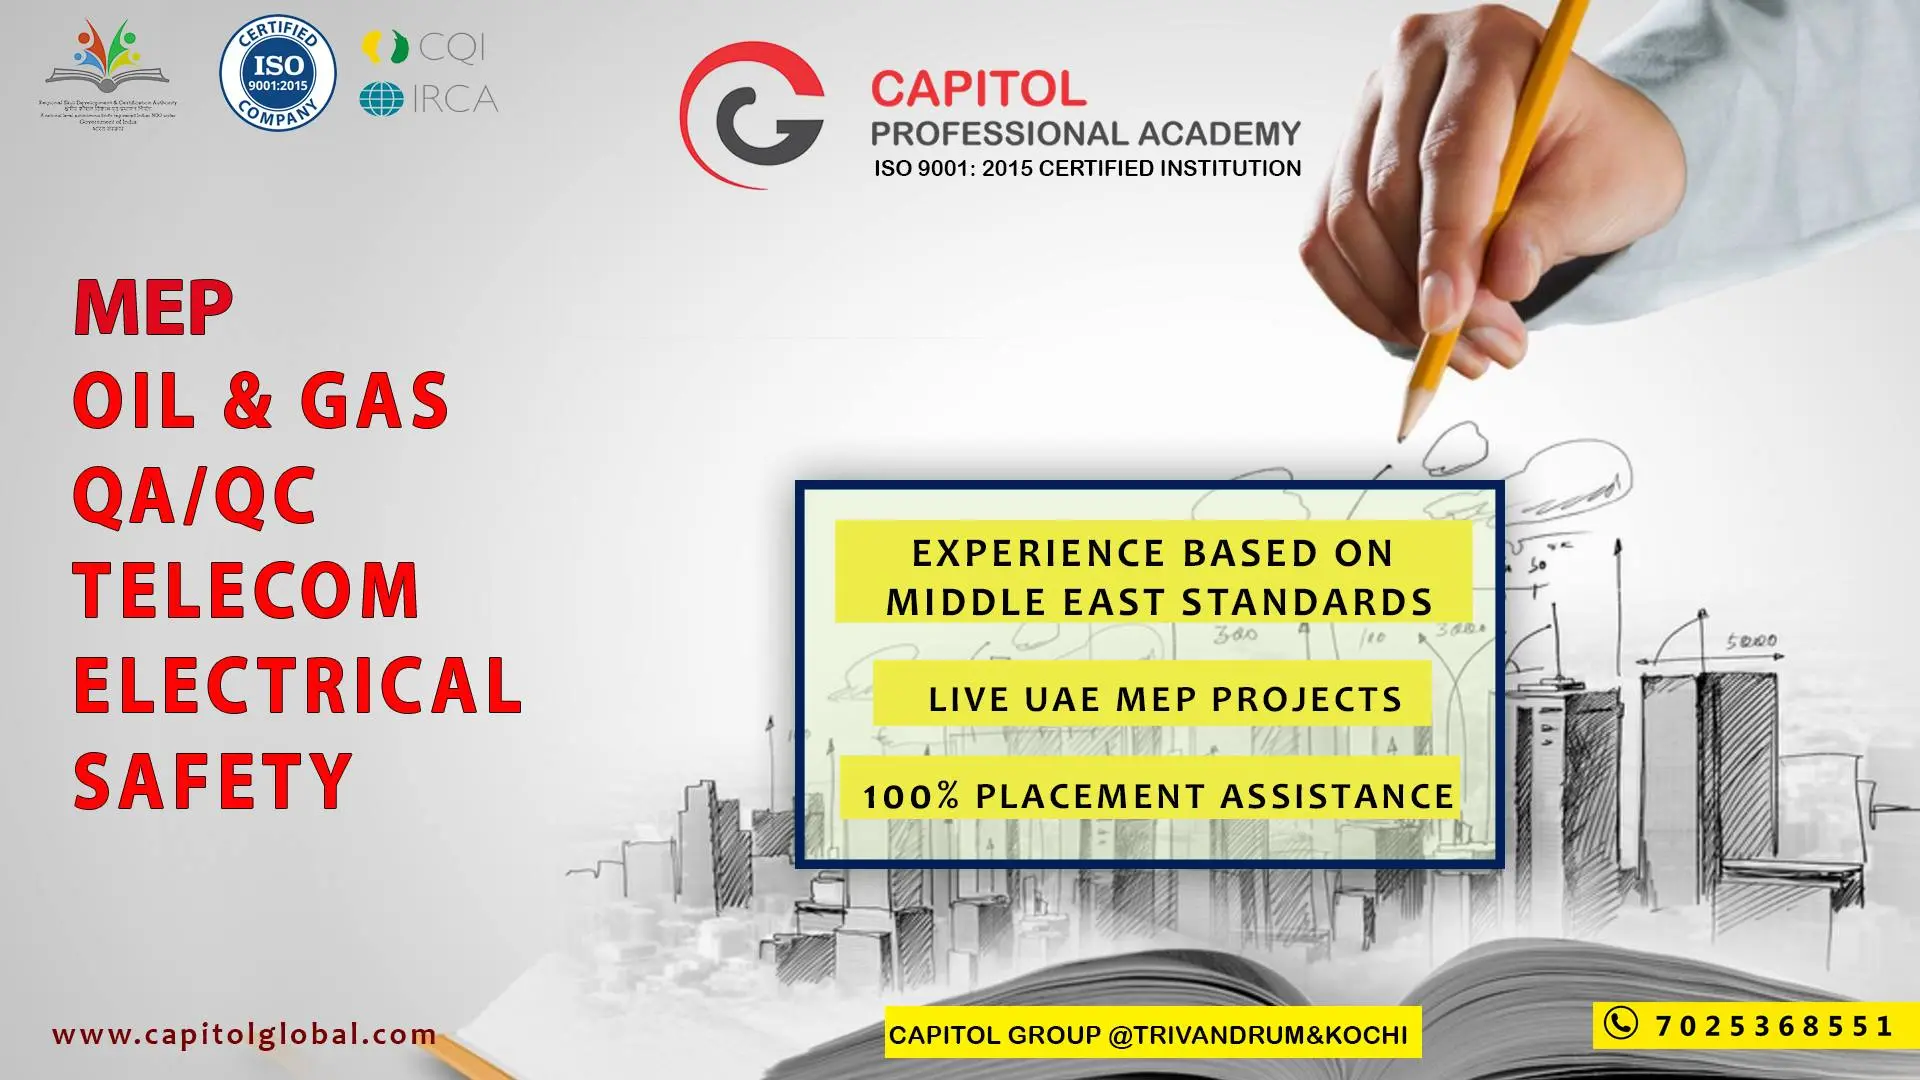 CAPITOL PROFESSIONAL ACADEMY